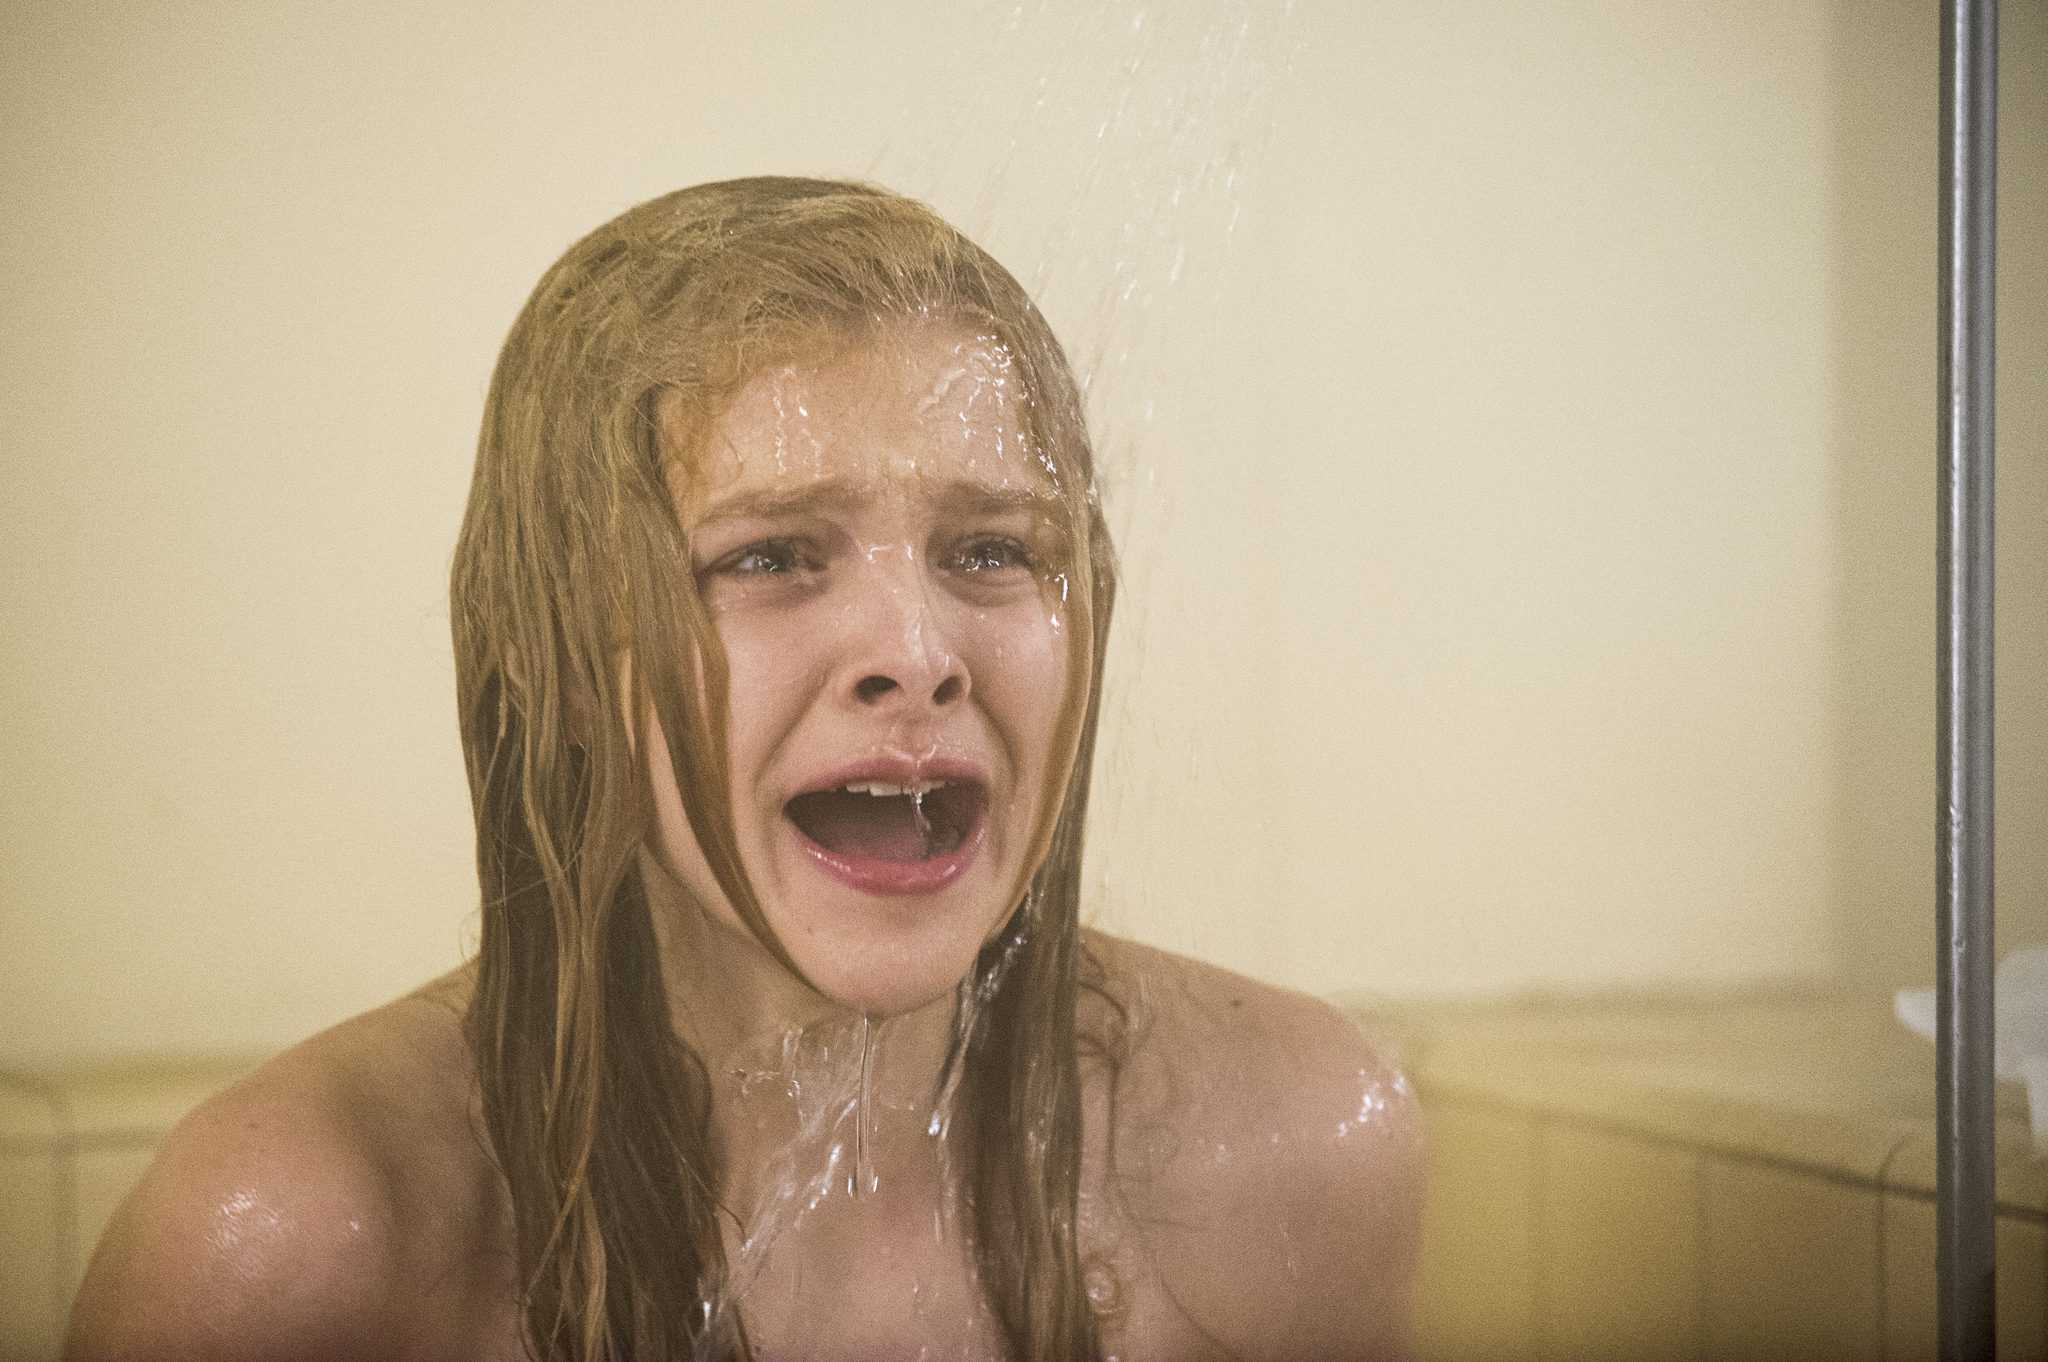 A still from Carrie (2013) featuring Chloe Grace Moretz